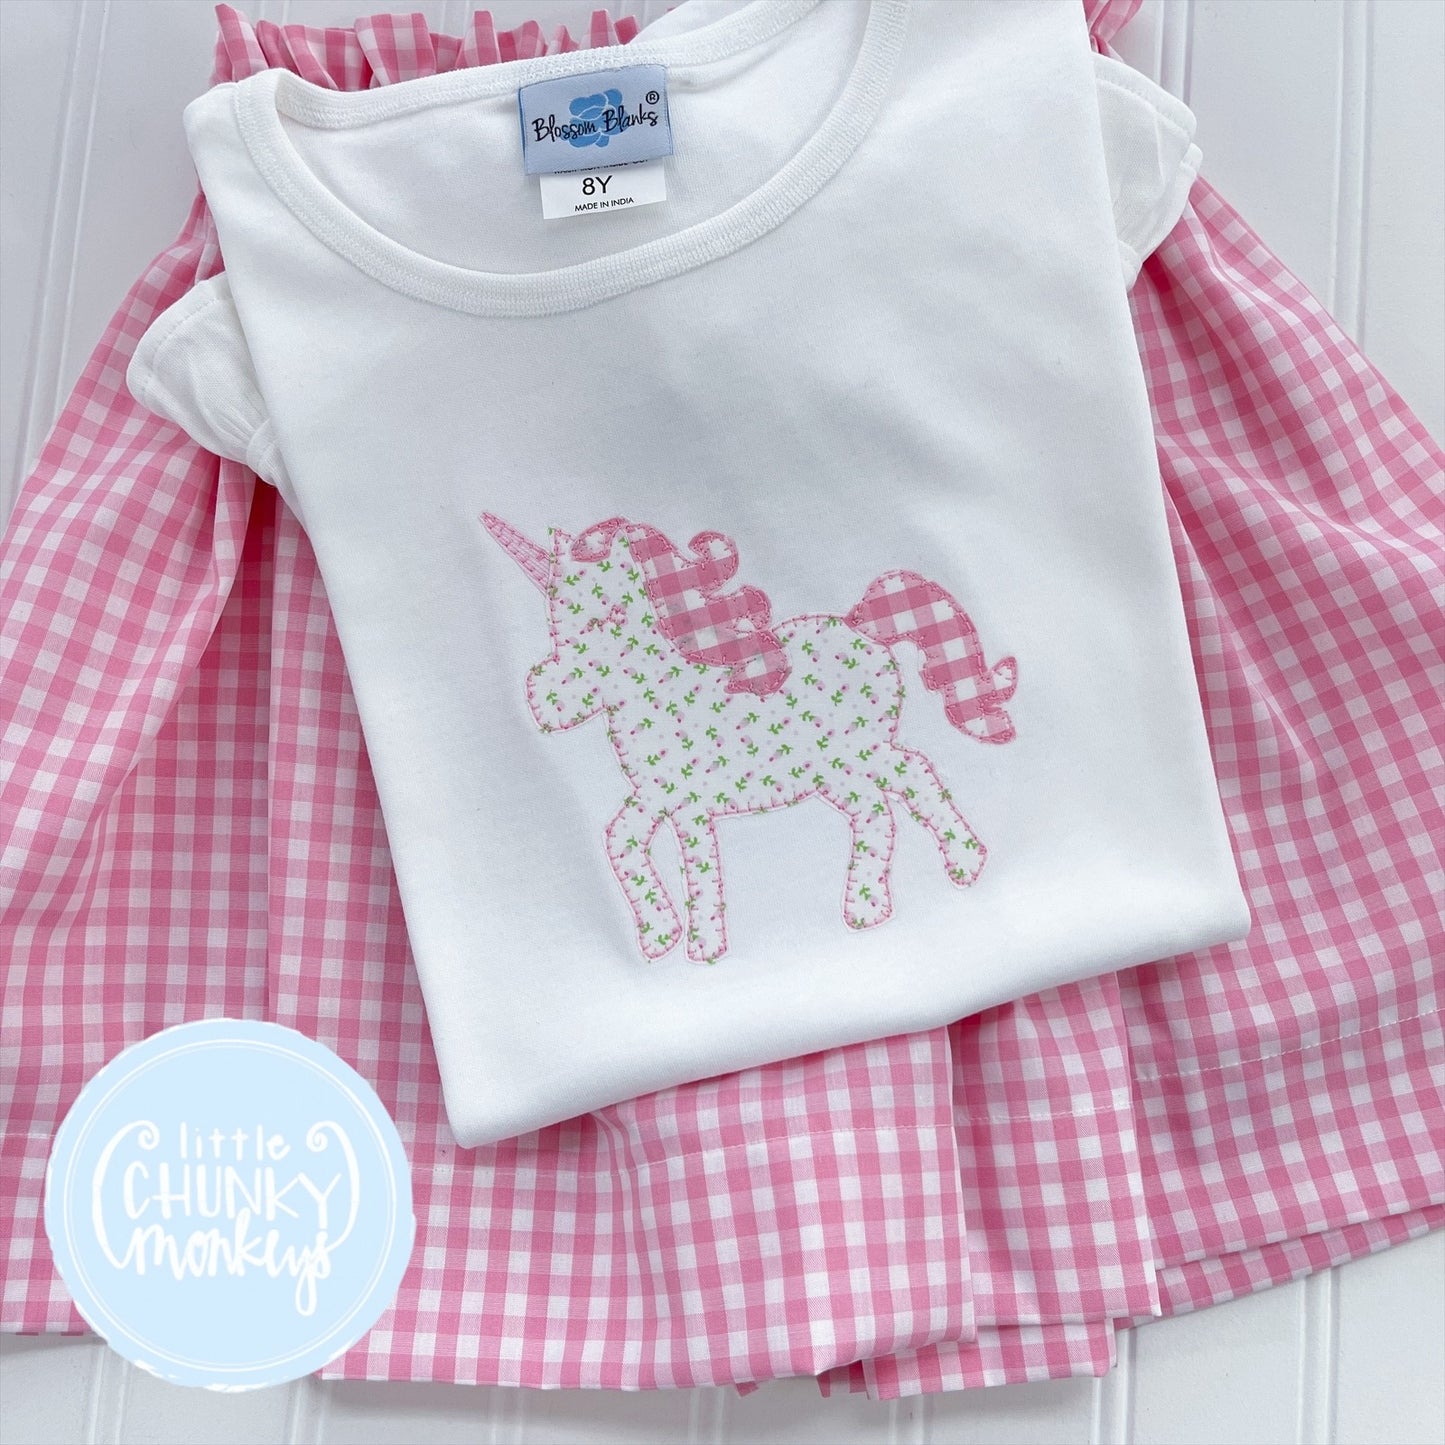 Girl Shirt - Applique Unicorn with Gingham